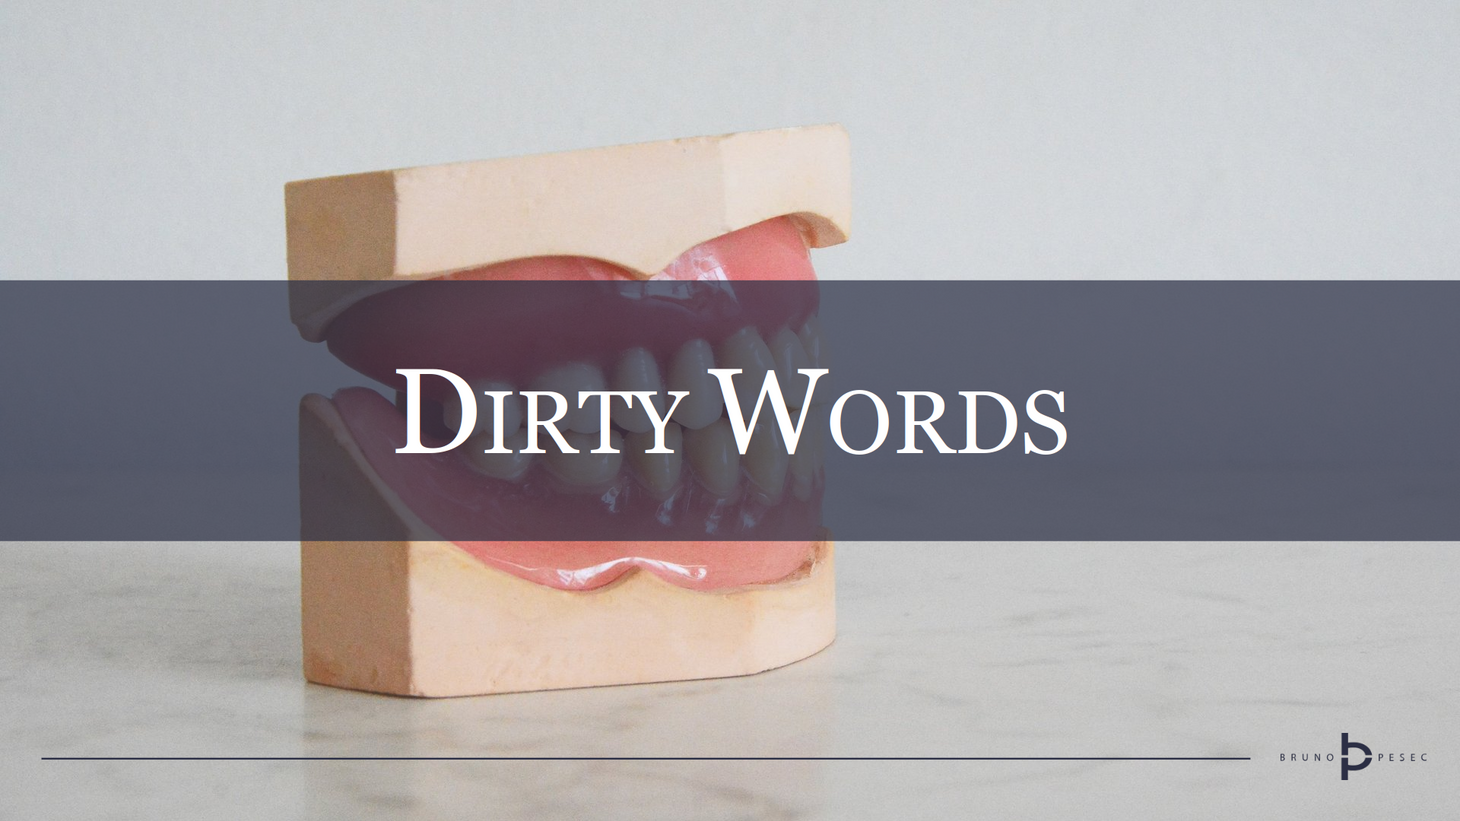 Dirty words